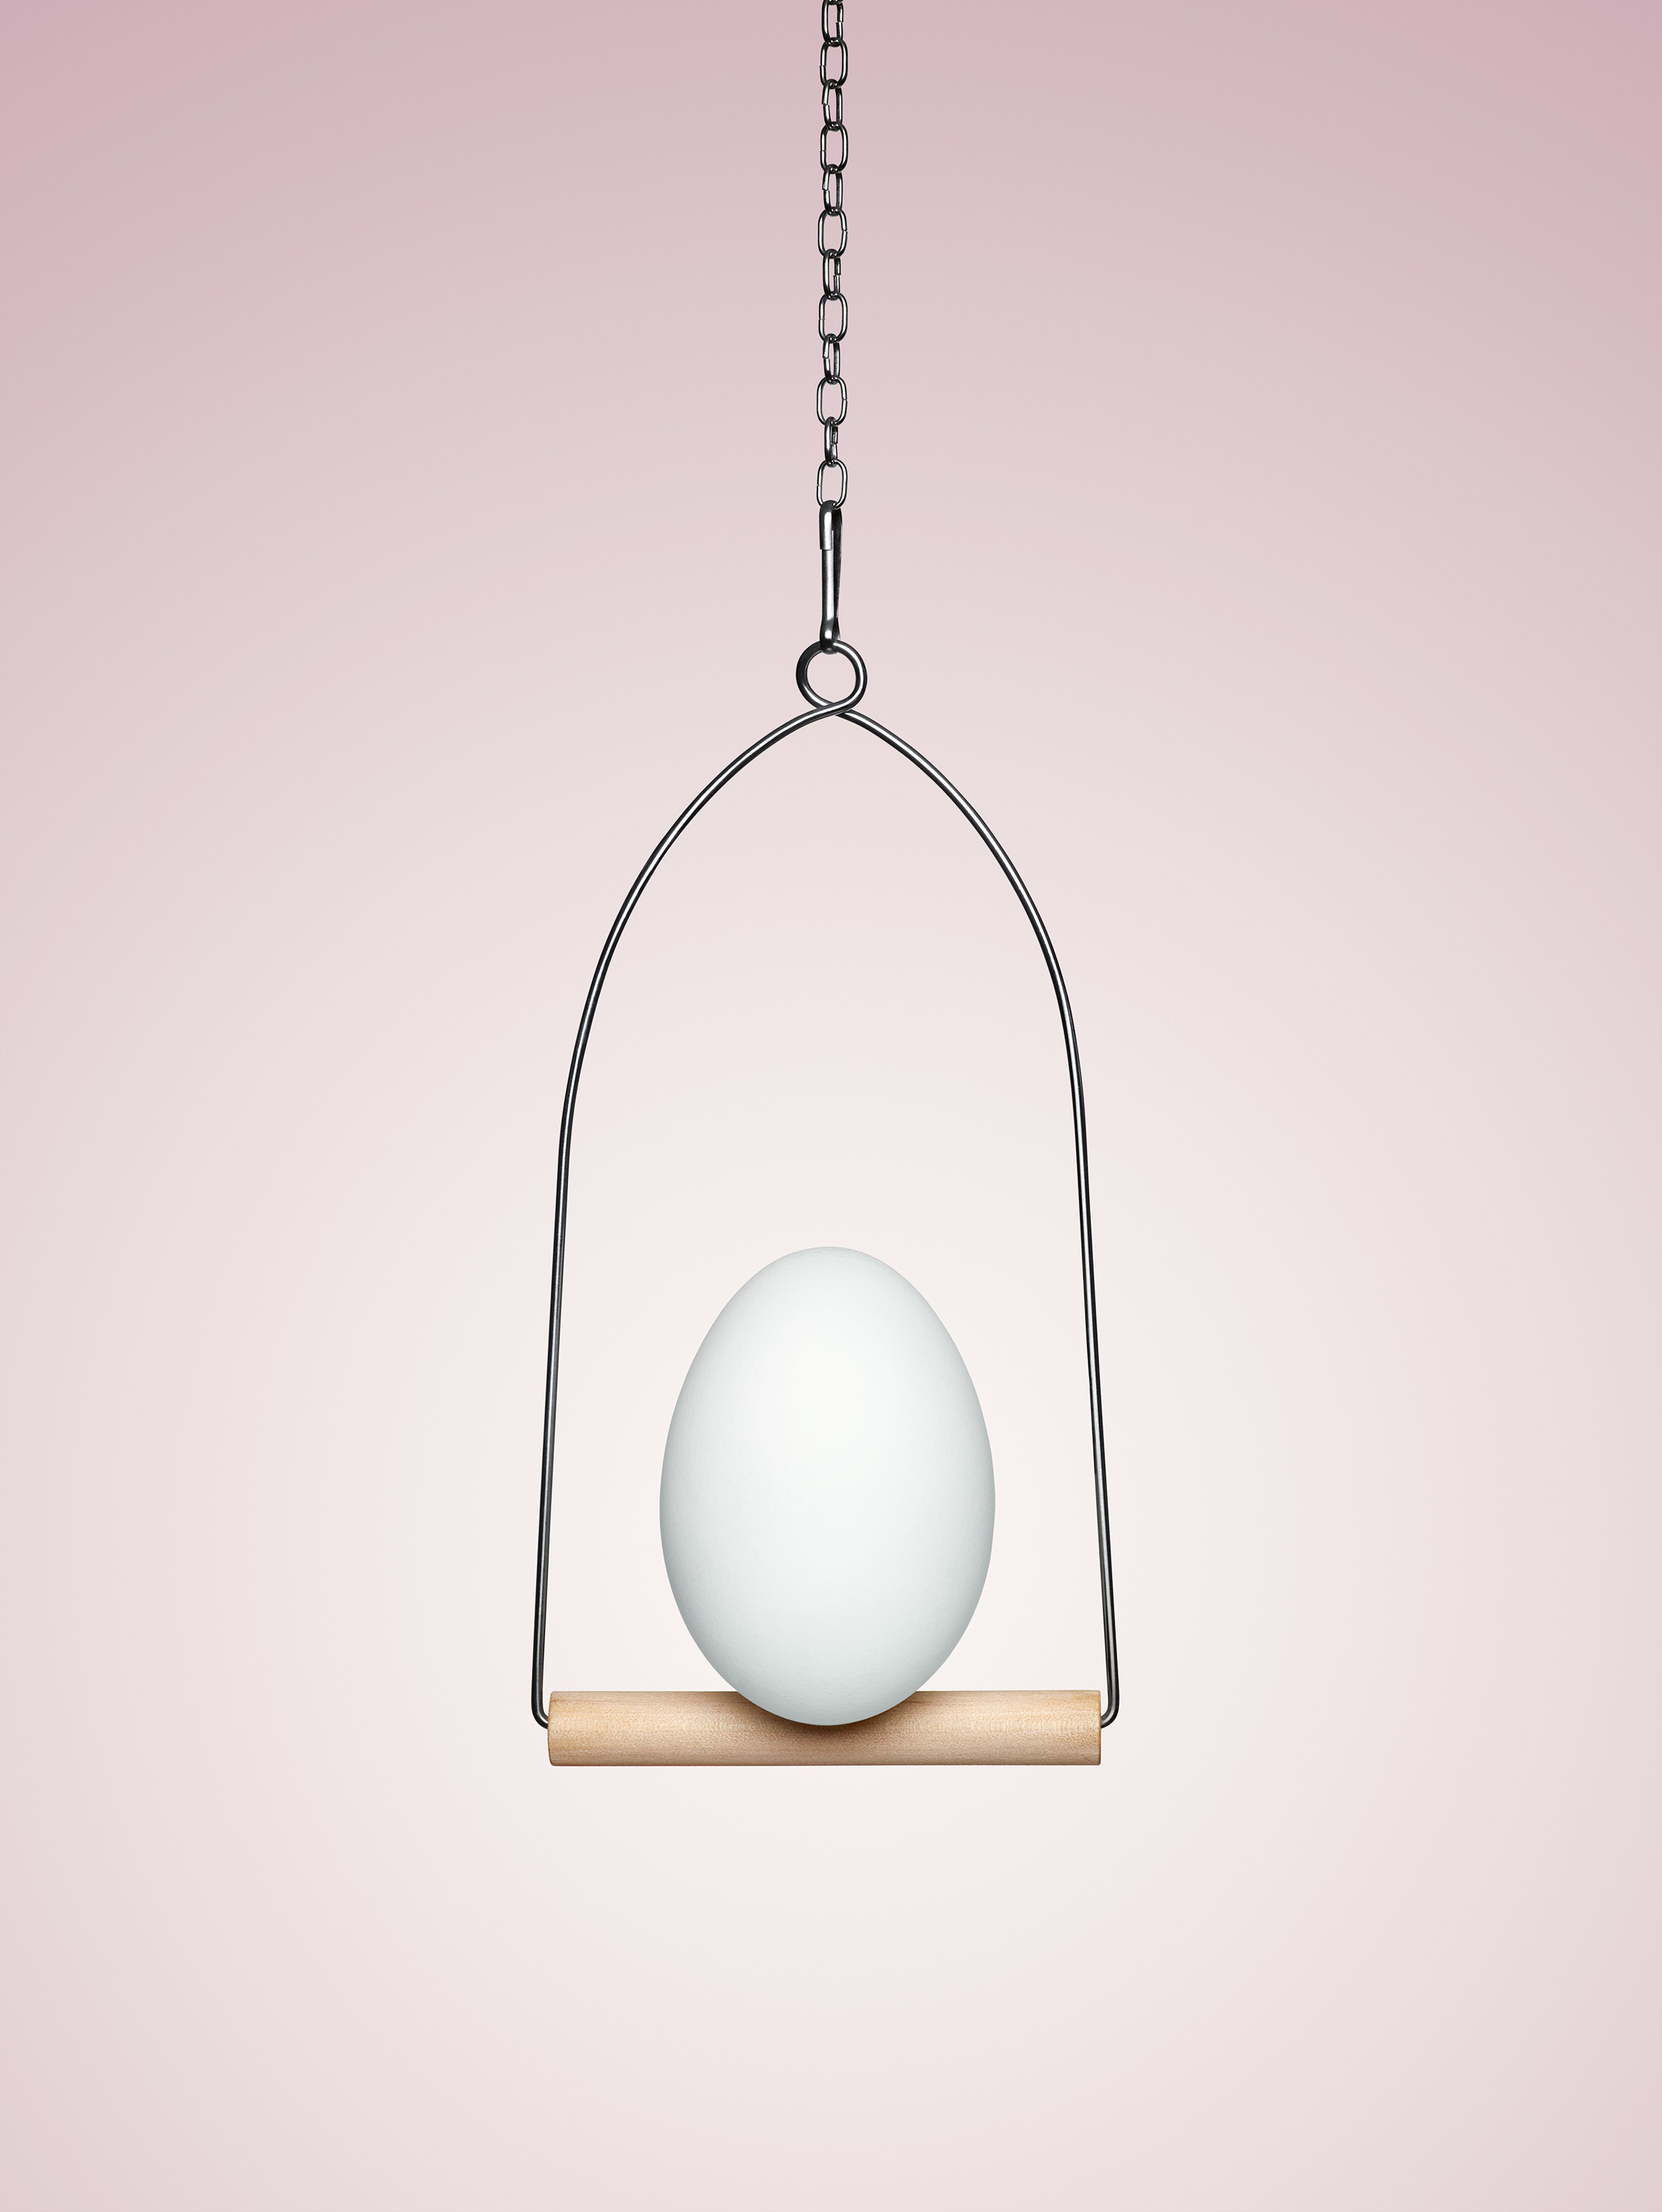 Egg perching on swing in pink room by Alexander Kent London based photographer.